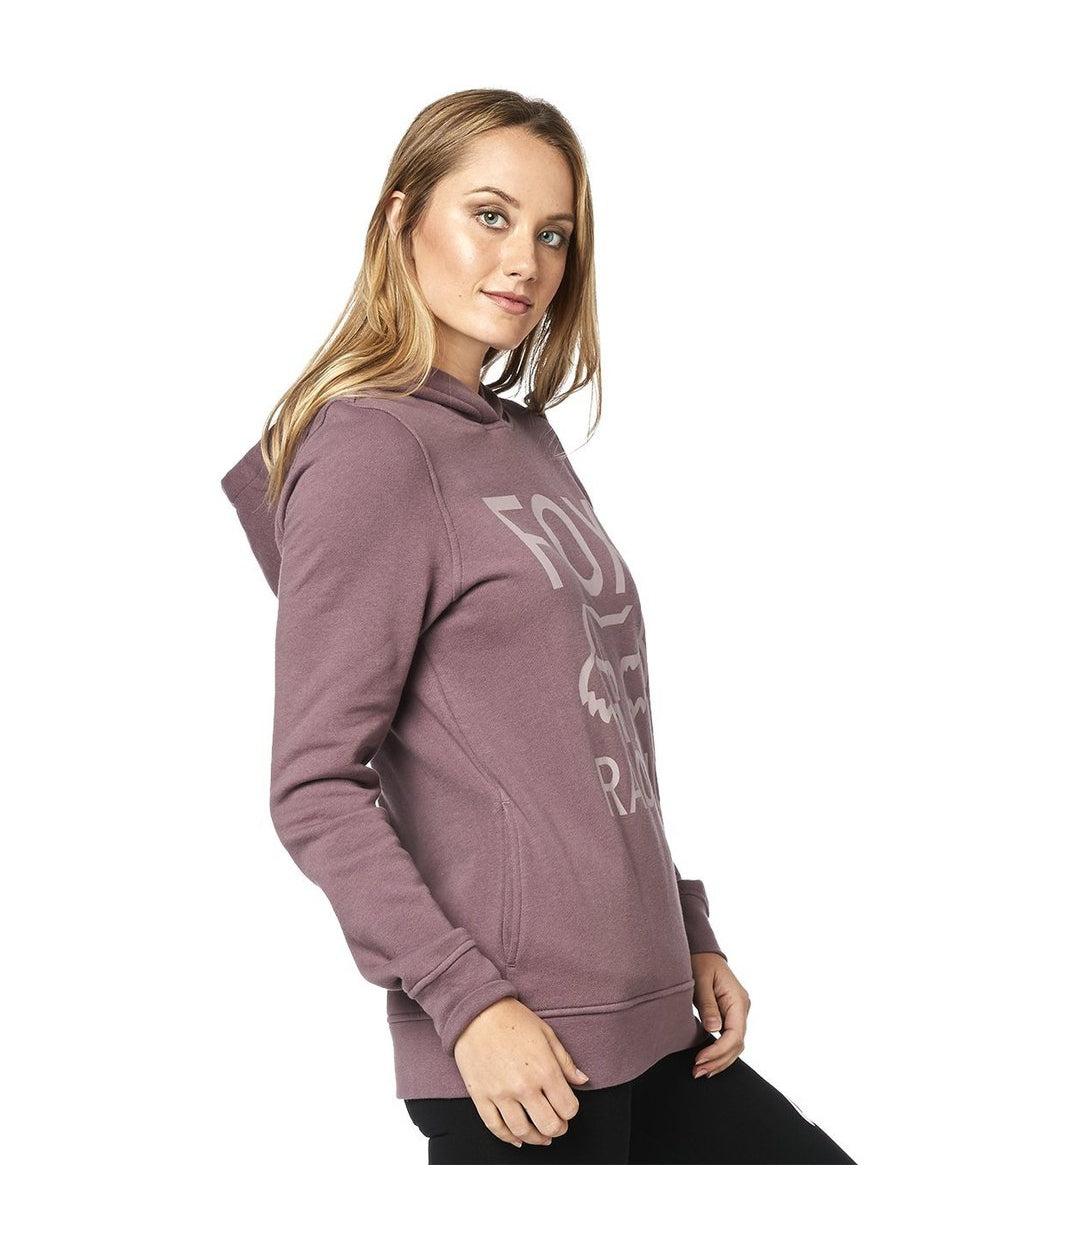 BUZO FOX MUJER CESTABLISHED - FOX RACING COLOMBIA - FOX CONCEPT STORE - BUZO